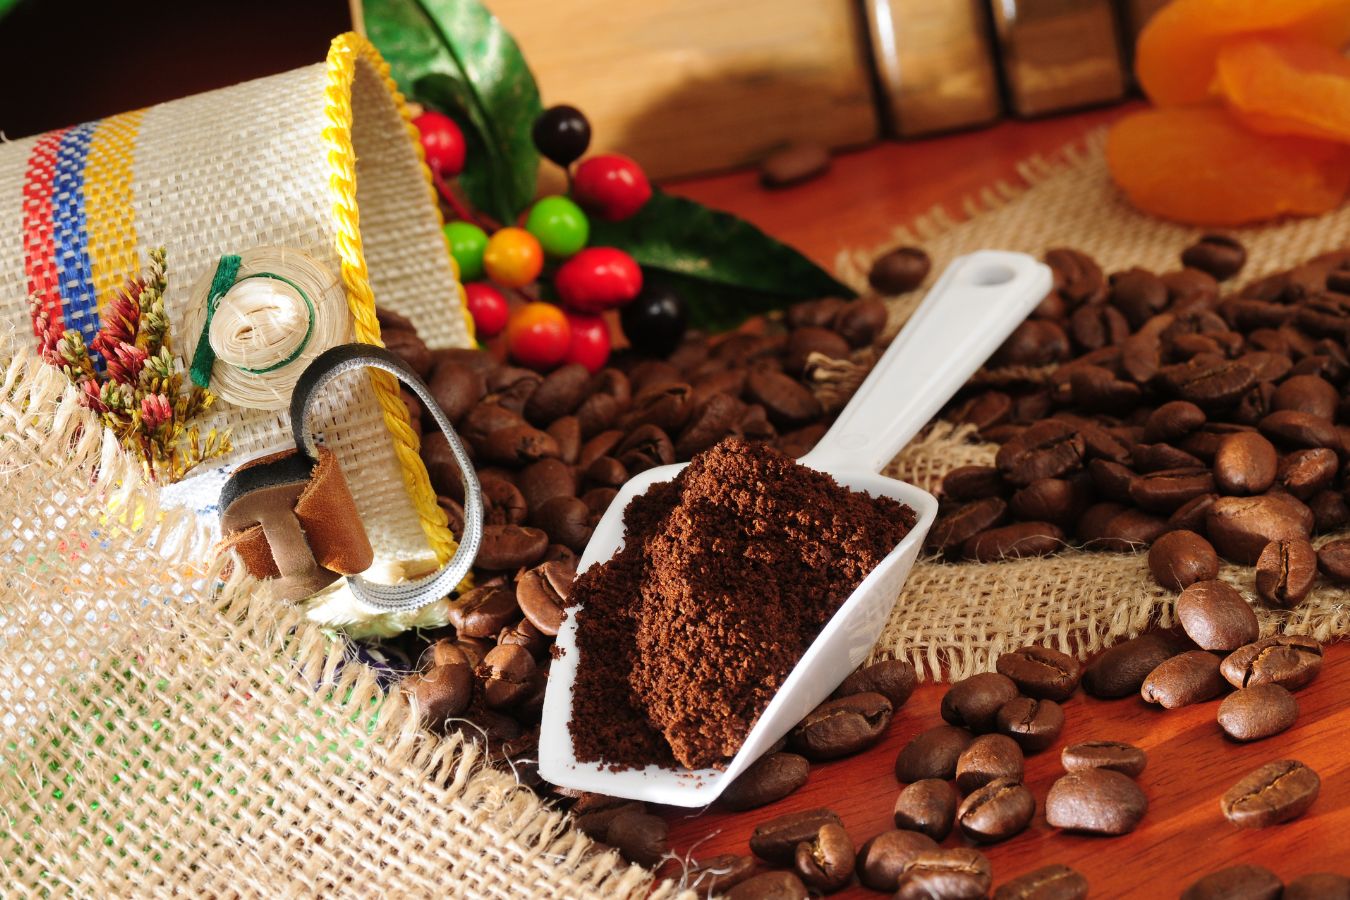 Do You Know Enough About These Different Coffee Origins?